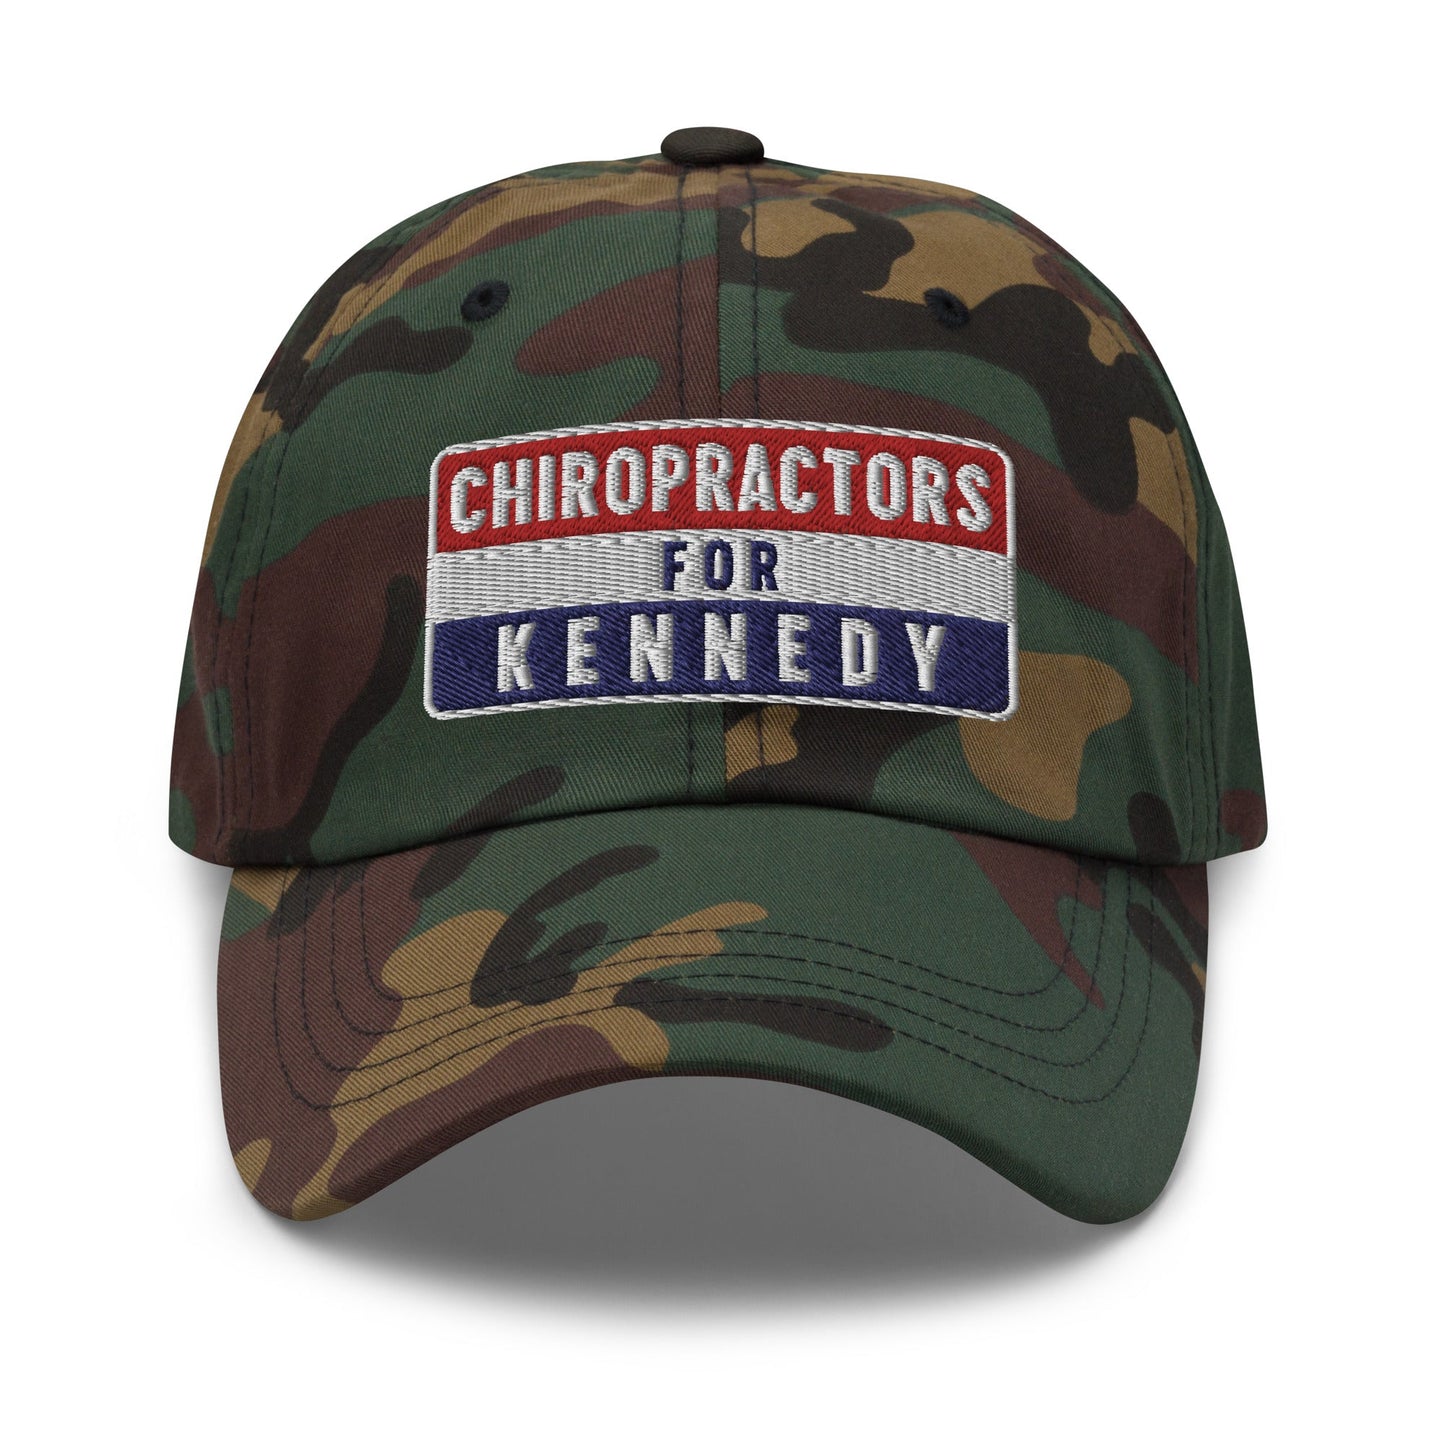 Chiropractors for Kennedy Dad Hat - TEAM KENNEDY. All rights reserved